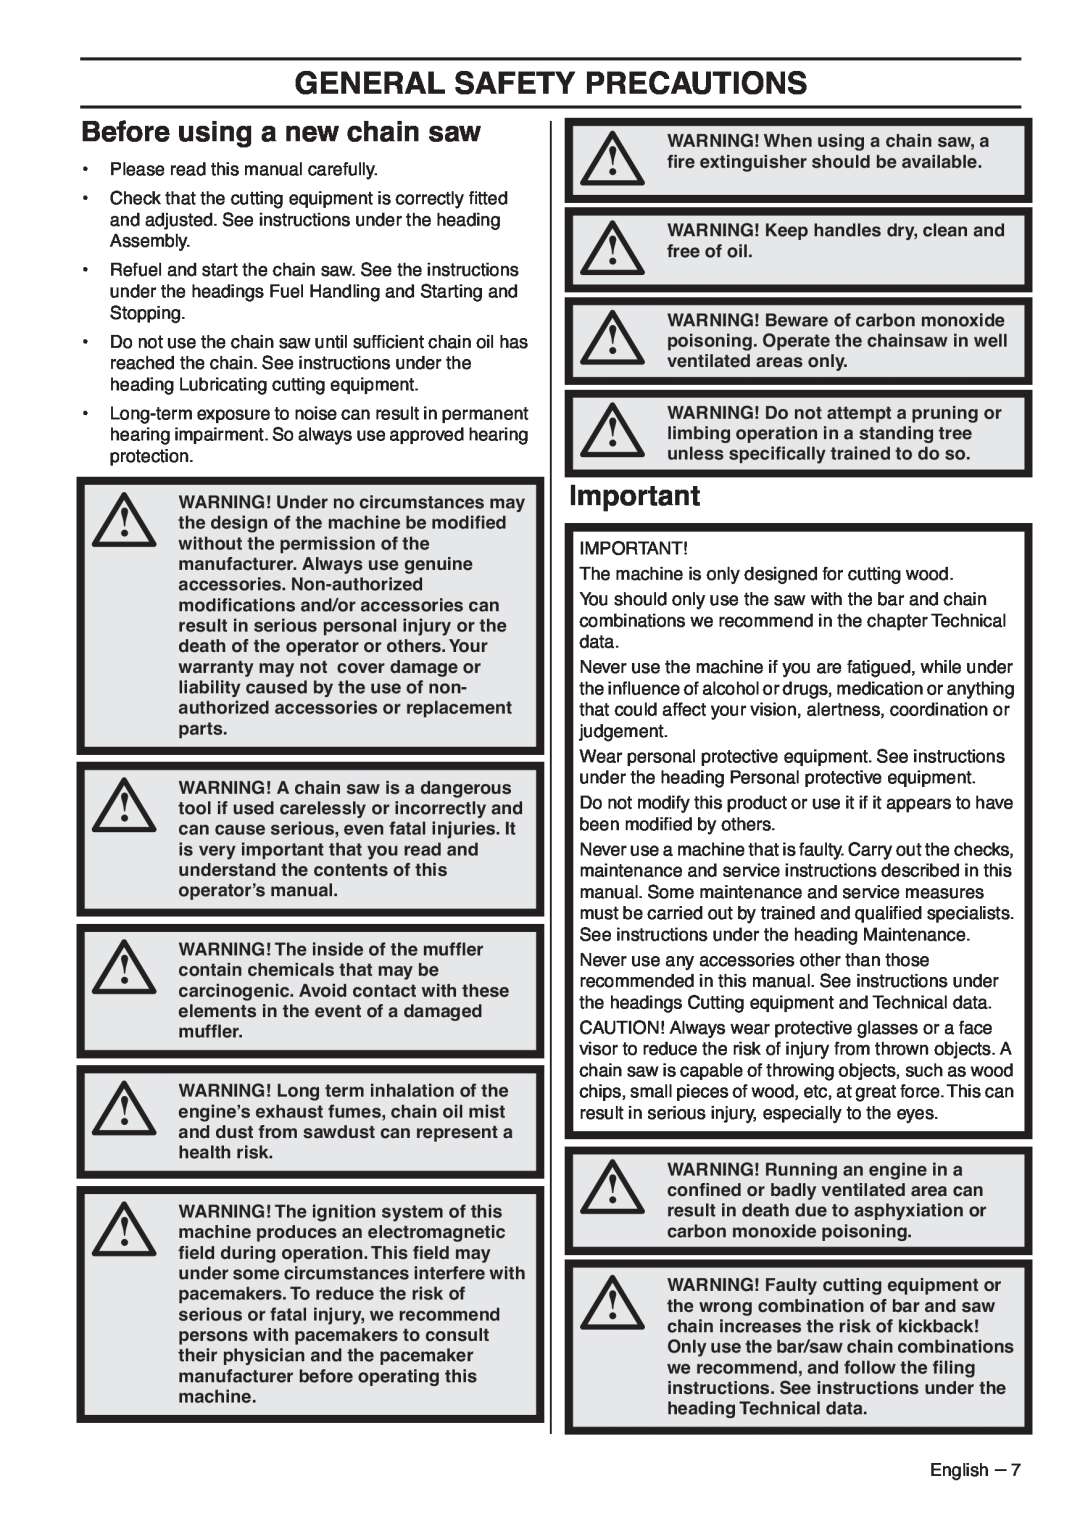 RedMax GZ7000 manual General Safety Precautions, Before using a new chain saw 